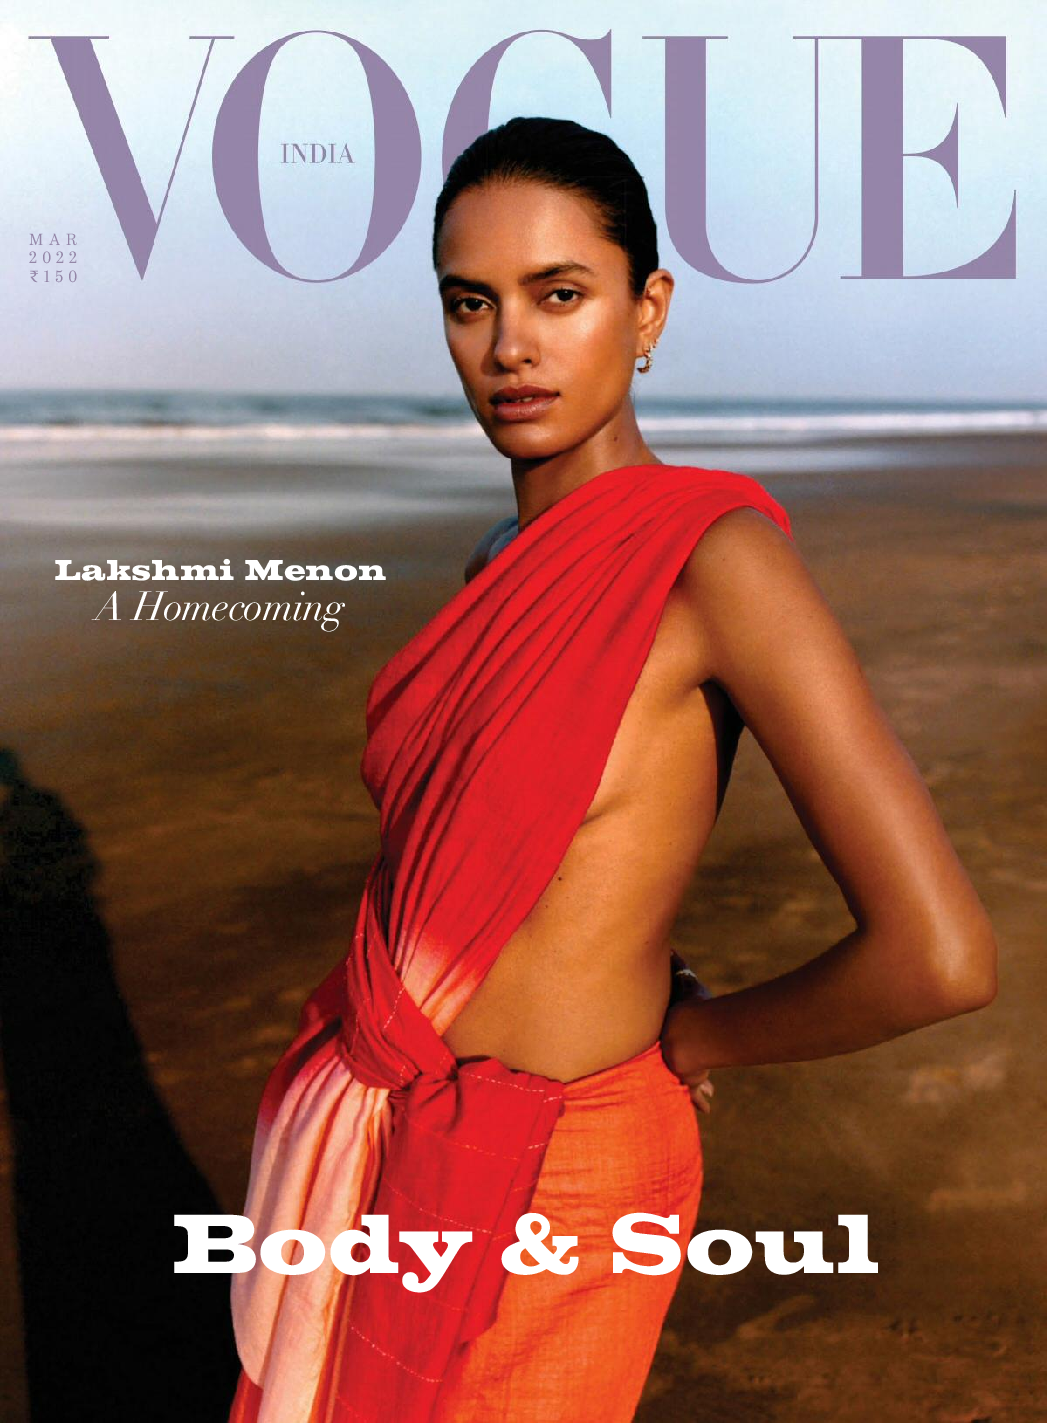 Vogue India - March 2022